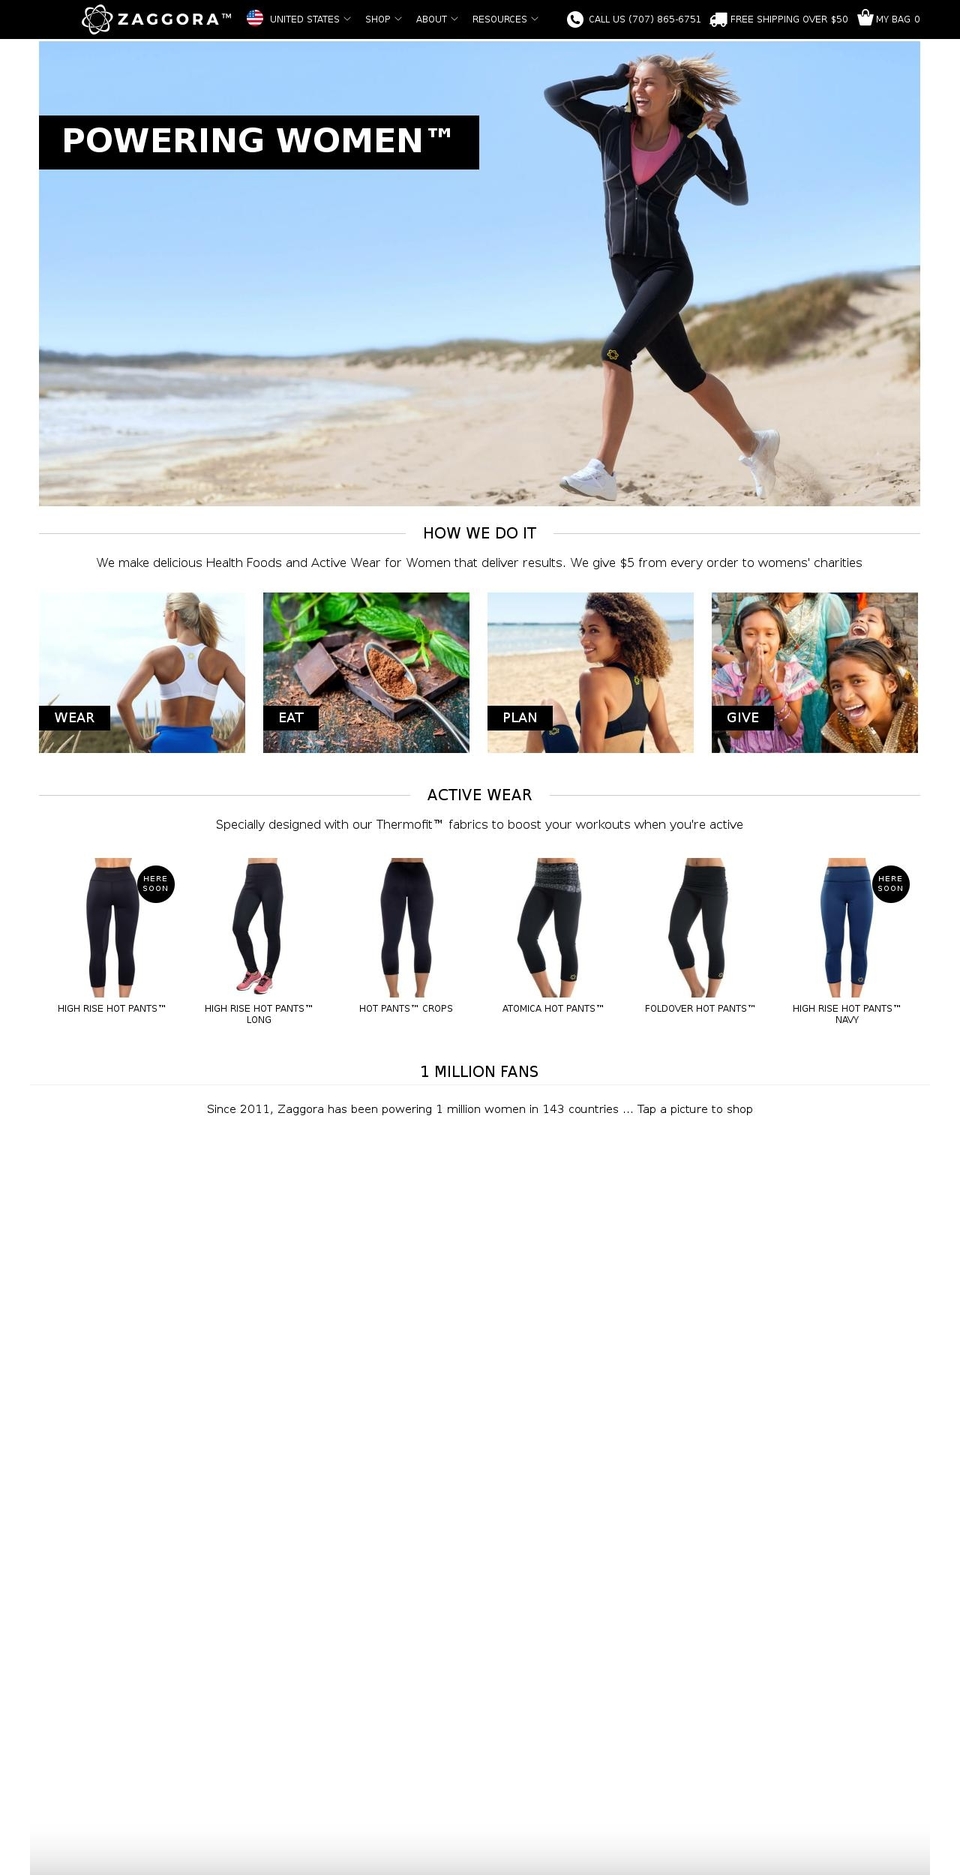 LIVE - 21th March - 5:25 PM Shopify theme site example zaggora.org